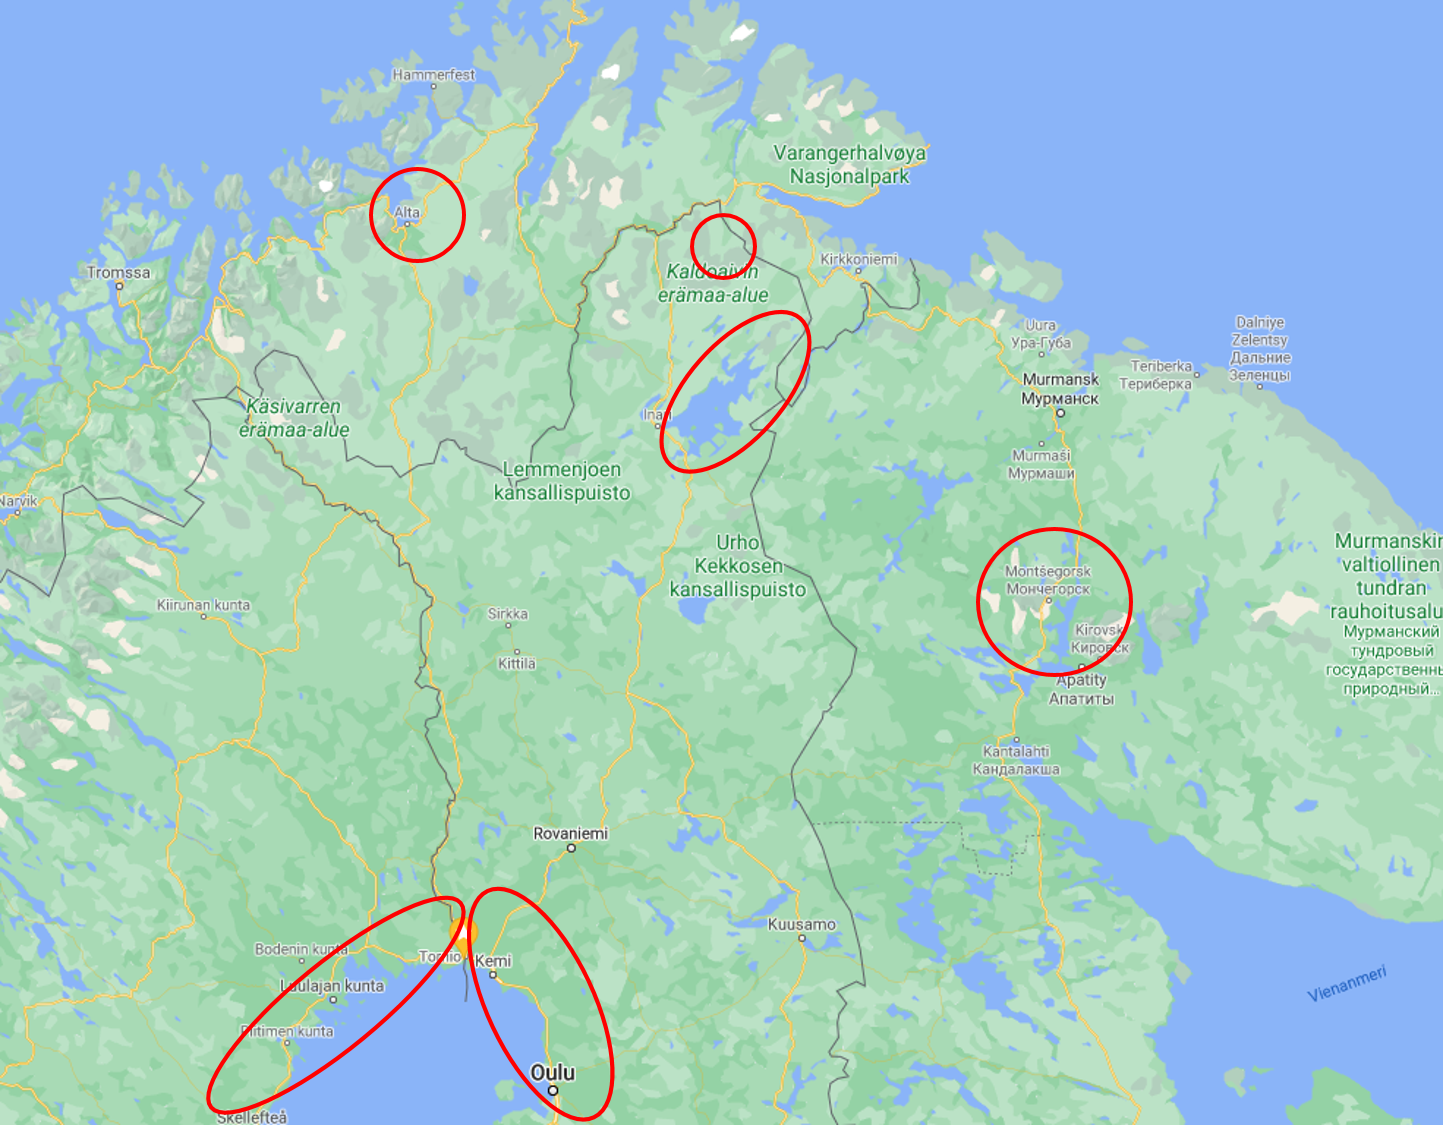 "The study areas of the HazArctic project in Norway, Sweden and Finland. "